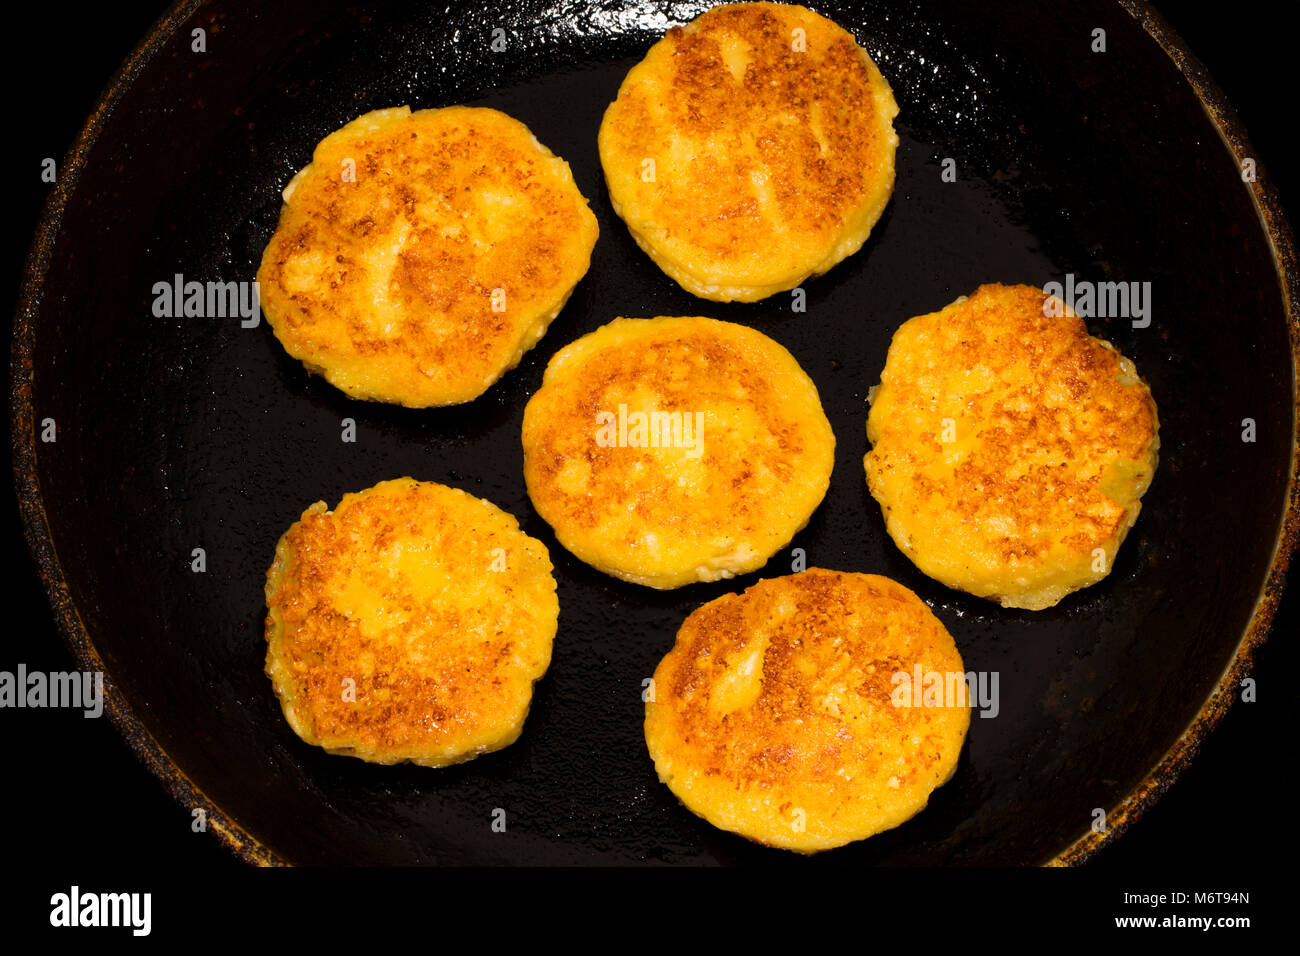 Fried curd cheese pancakes, cheesecakes in frying pan, close up view. Stock Photo